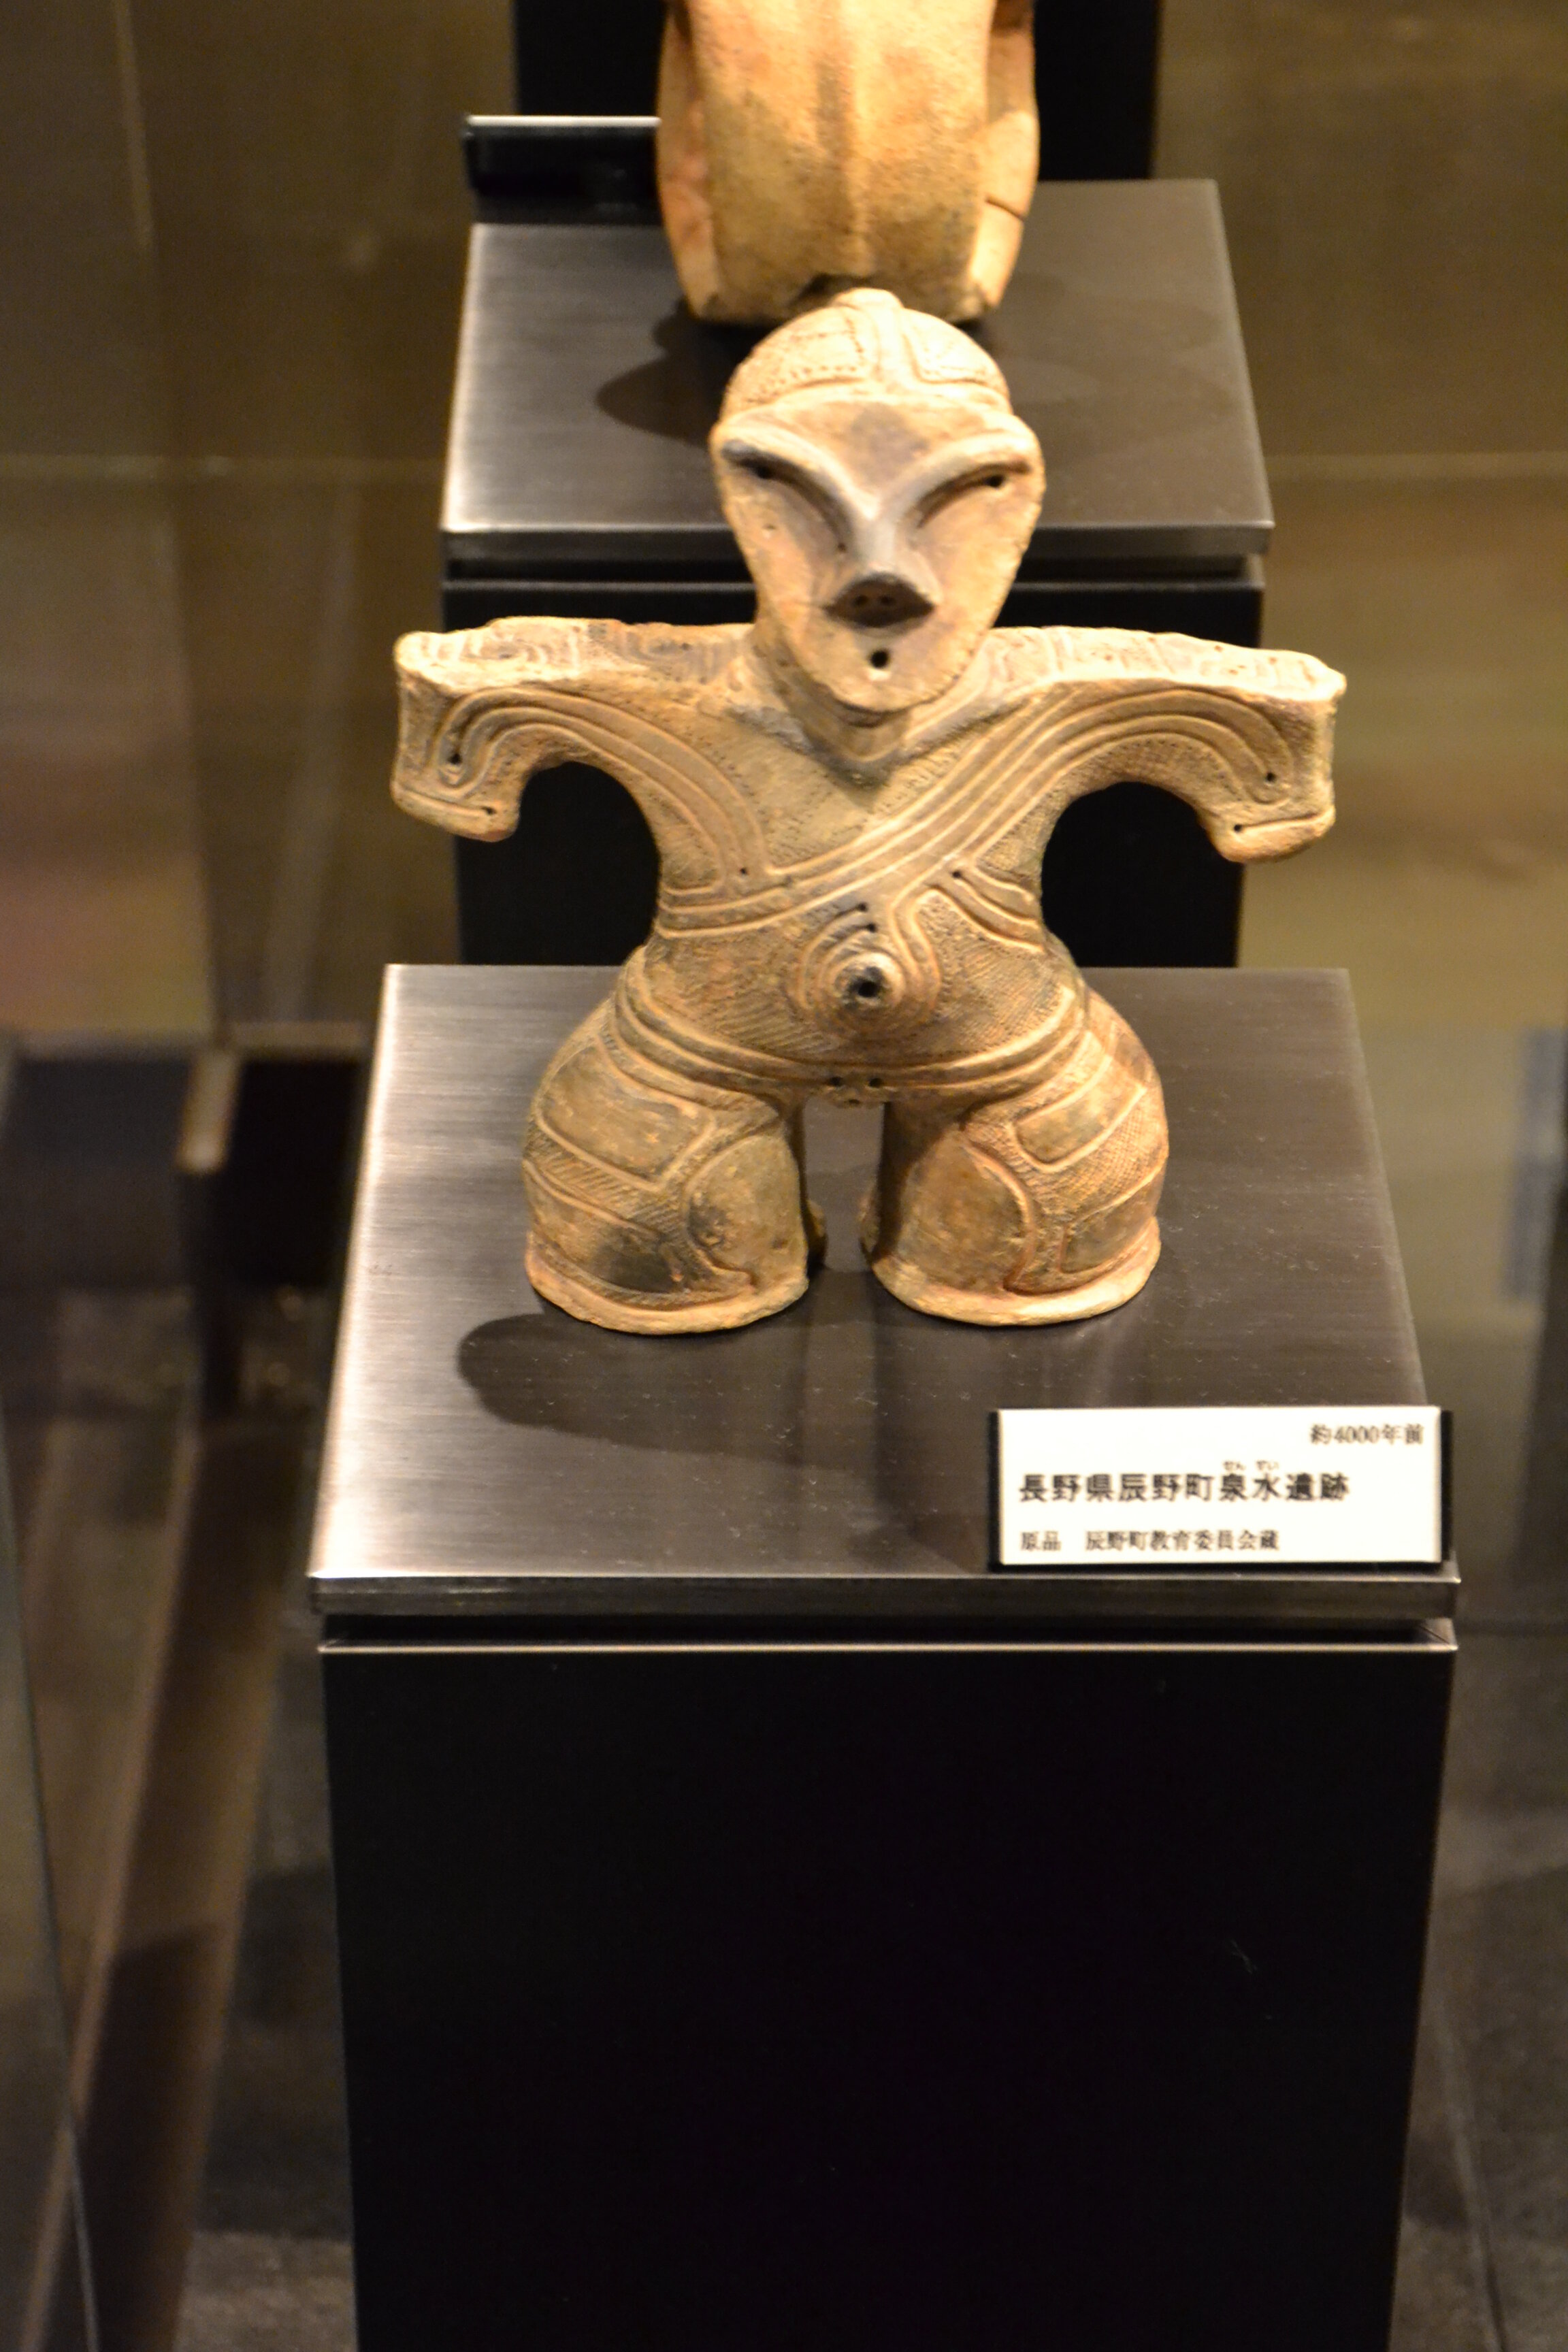  Middle Jomon replica figurine, or dogu. Photo by author, taken at the  National Museum of Japanese History  in Sakura, Japan 